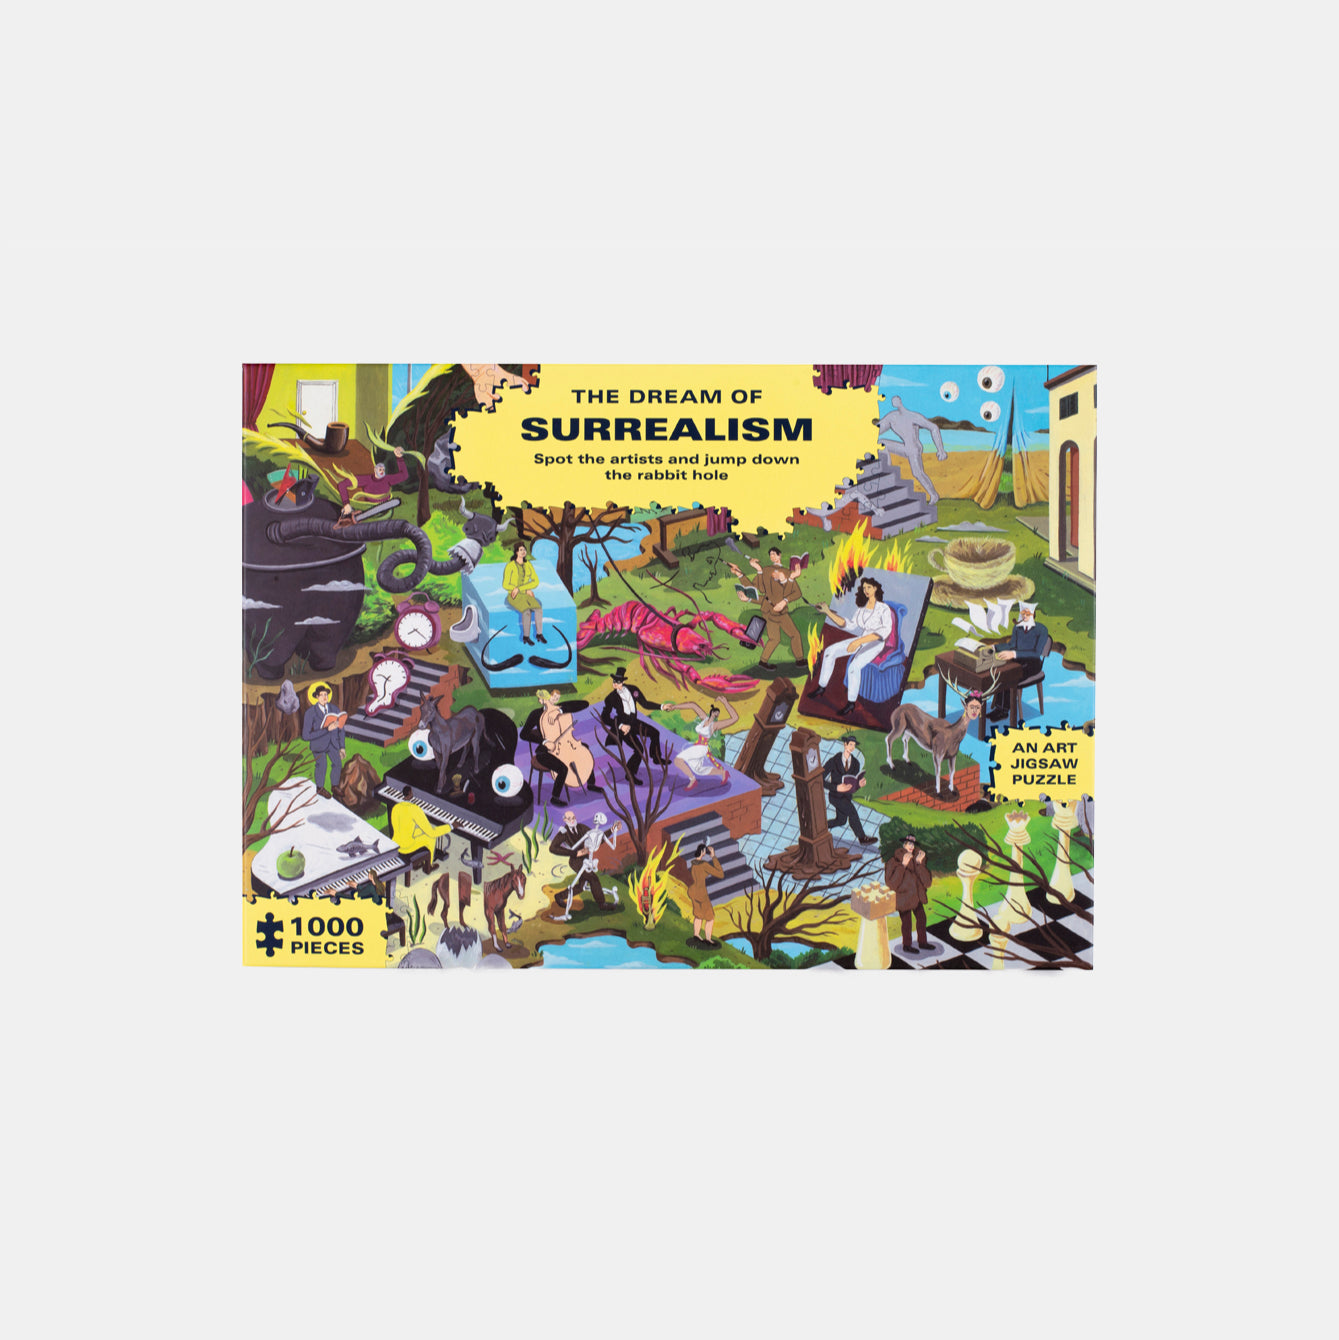 The Dream of Surrealism - 1000 Piece Jigsaw Puzzle